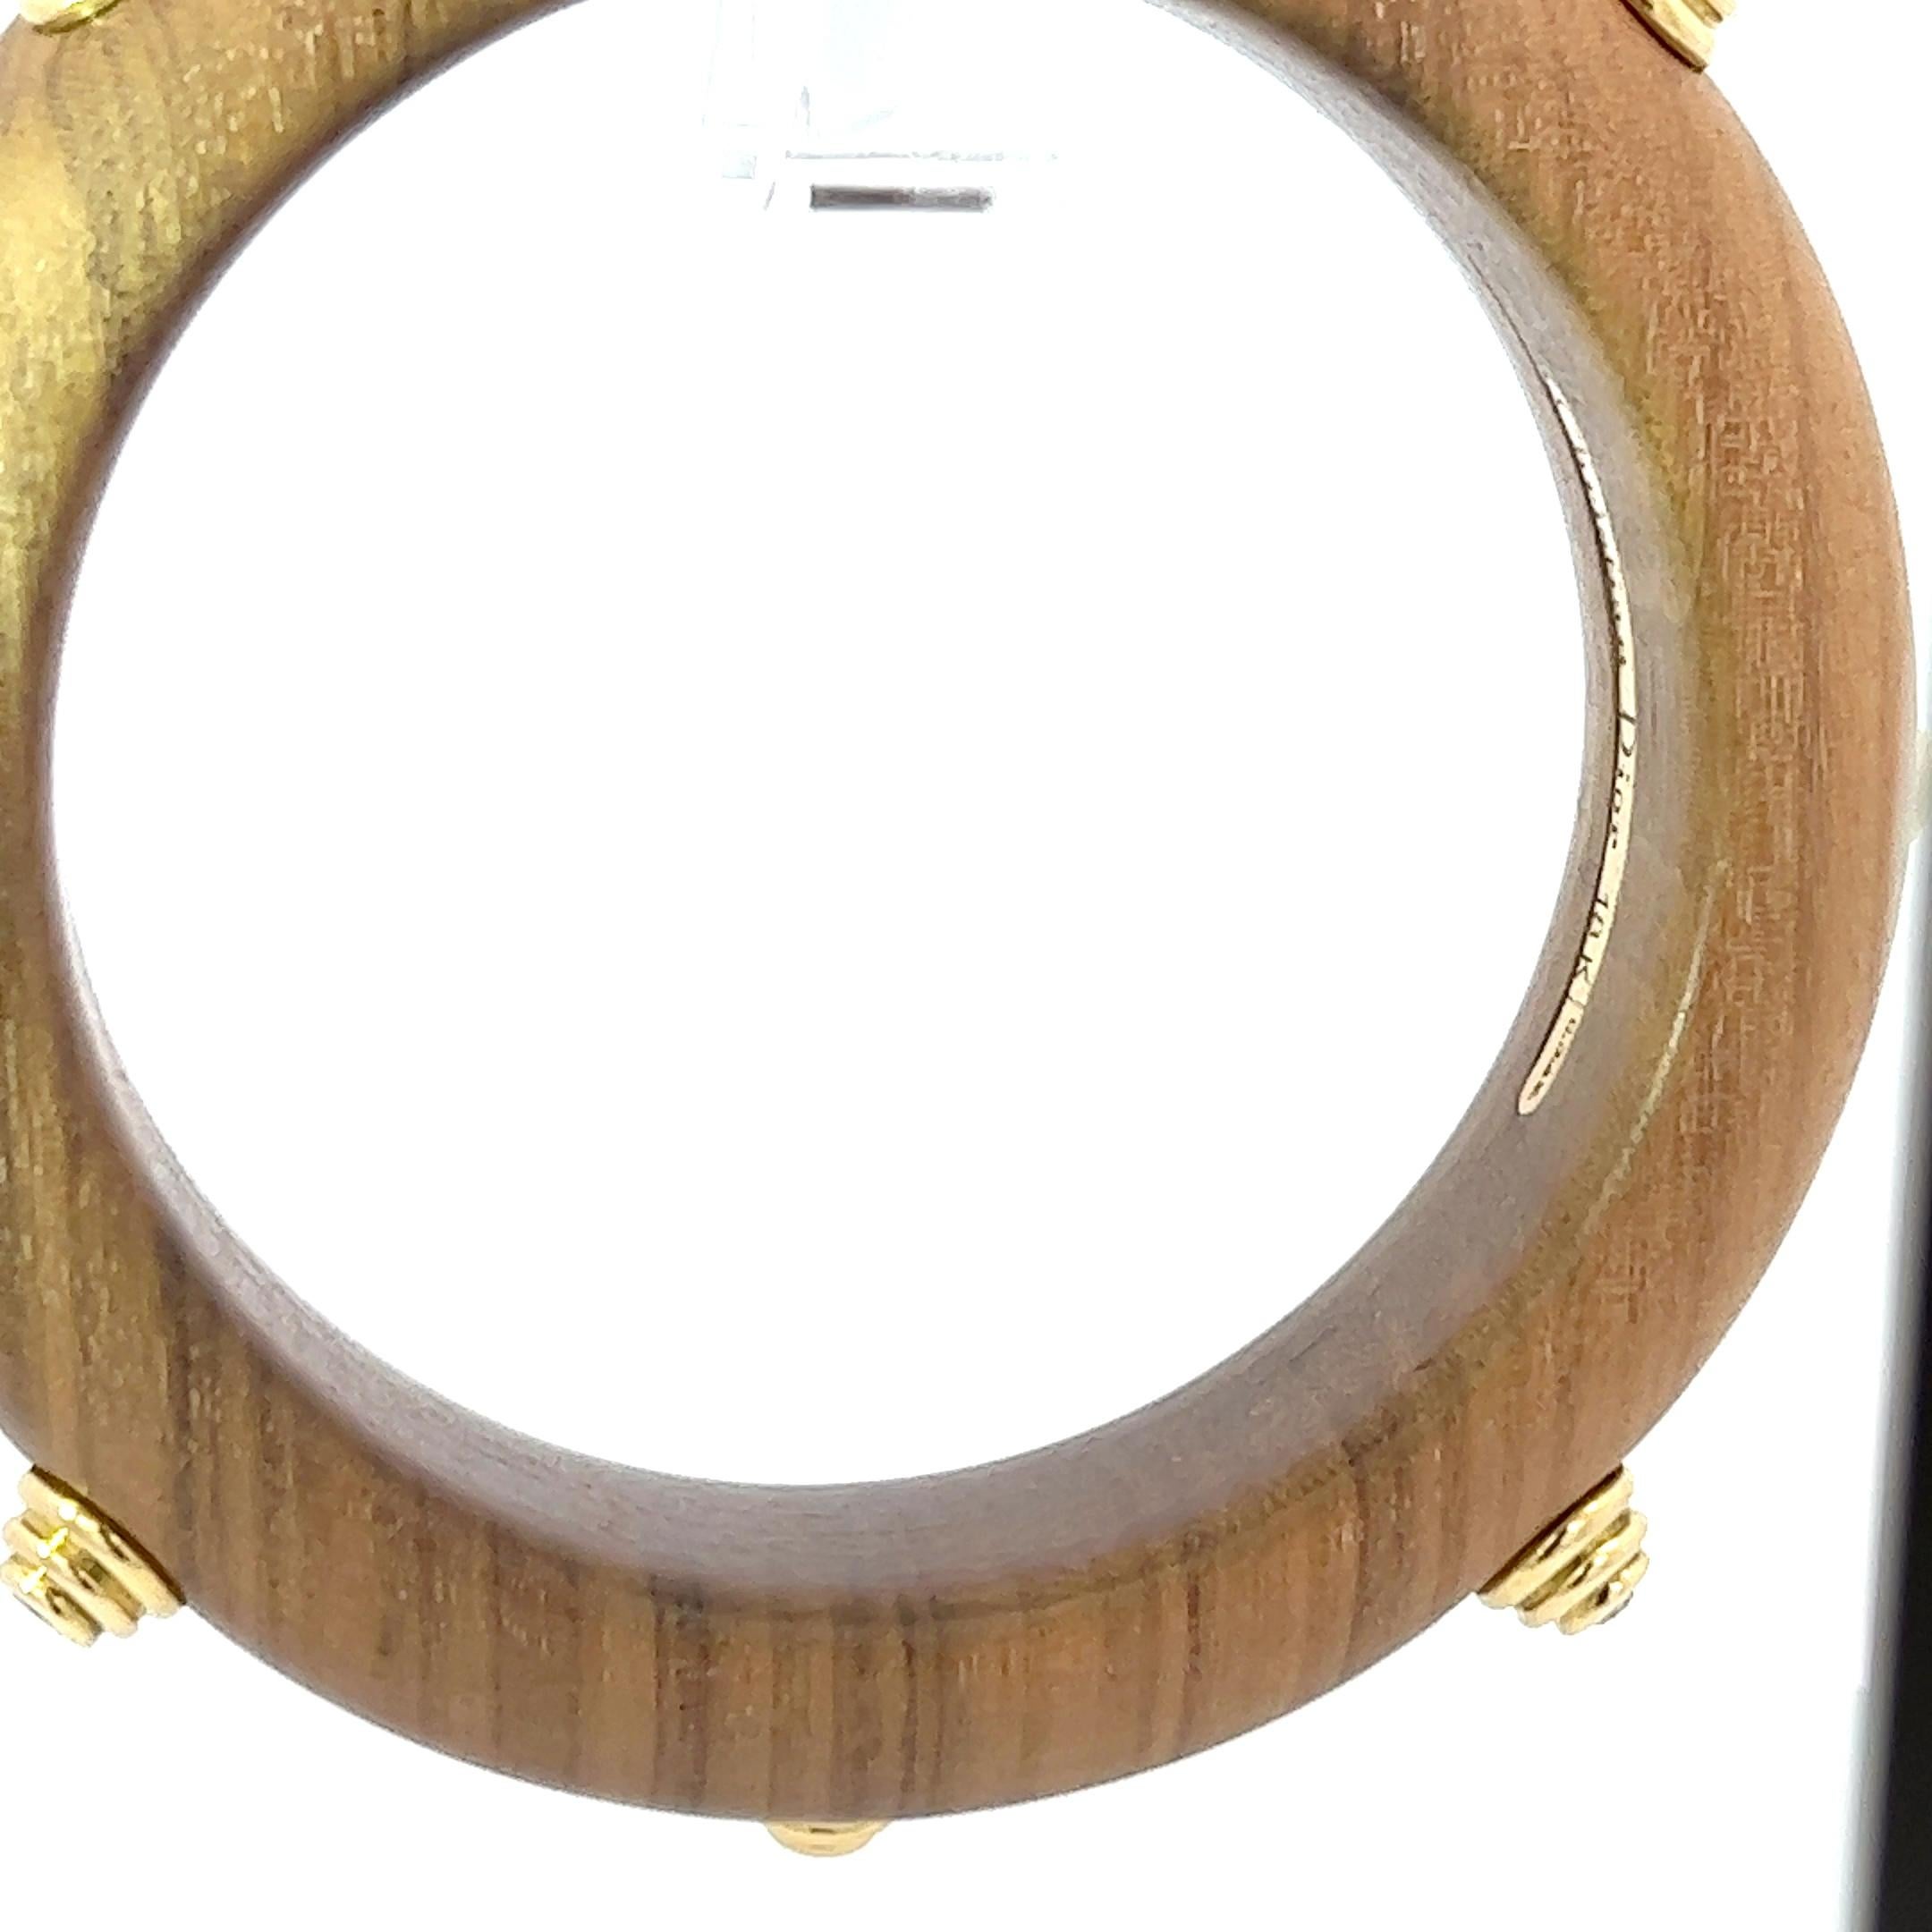 A very rare 18k yellow gold, wood and diamond bangle by Christian Dior.
Probably from the 1970s.
Total diamond weight: circa 0.8ct.

The bangle is signed Christian Dior and marked with the makers mark. Stamped with 18k.

Please note that this